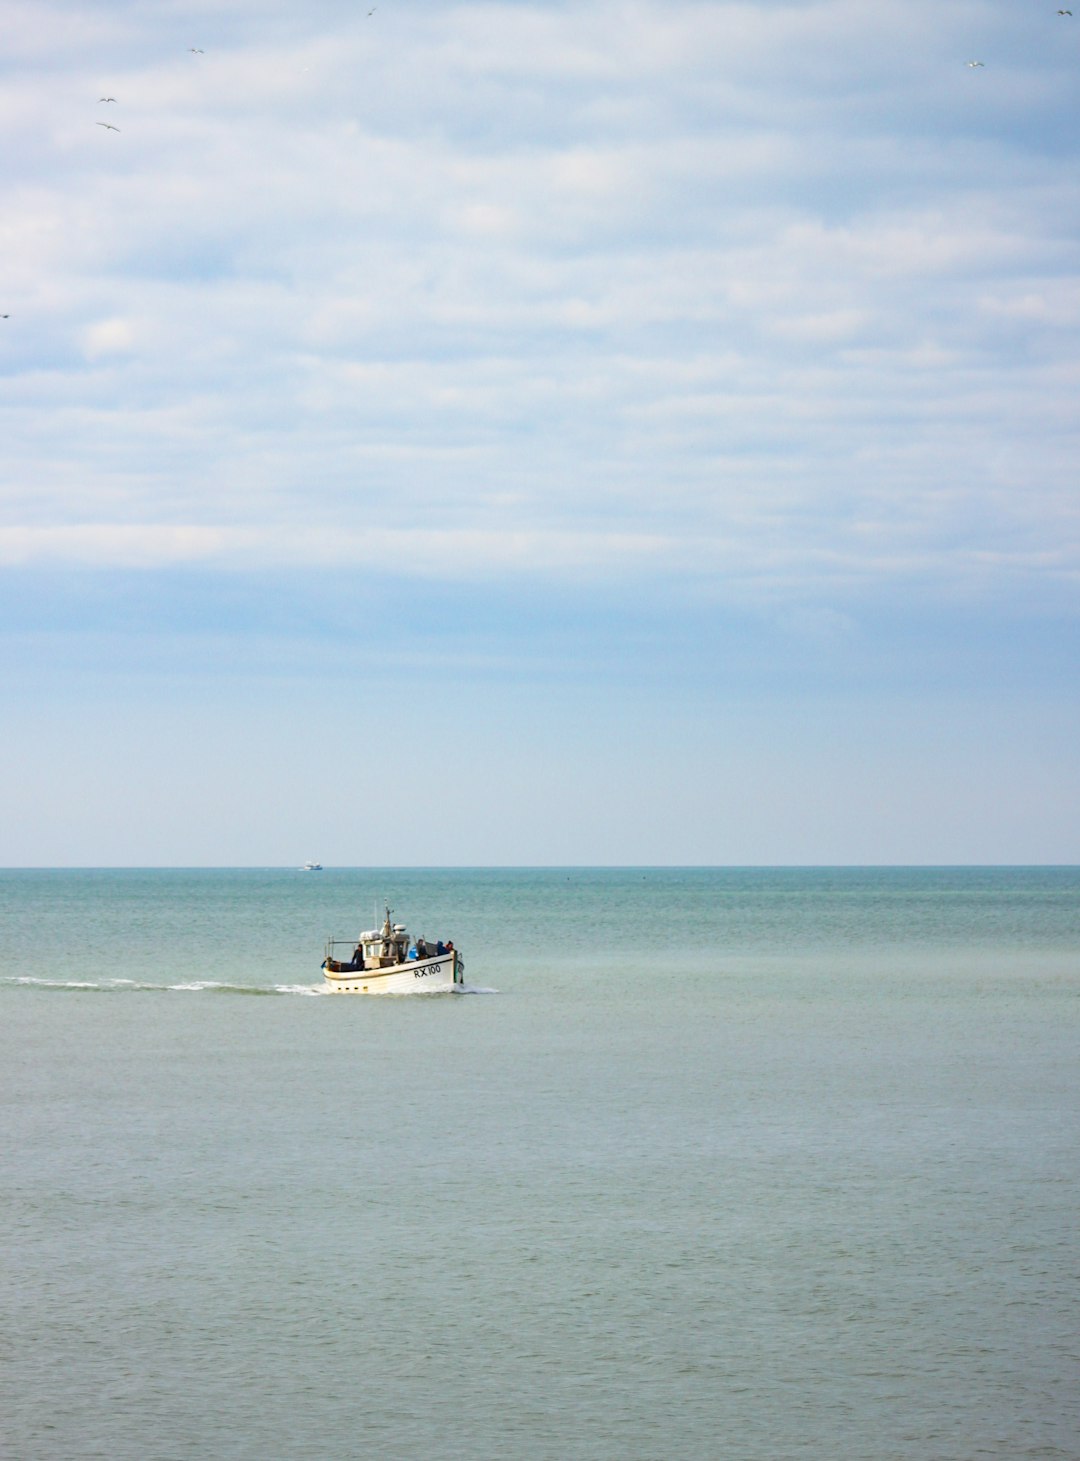 white and black boat on sea under blue sky during daytime